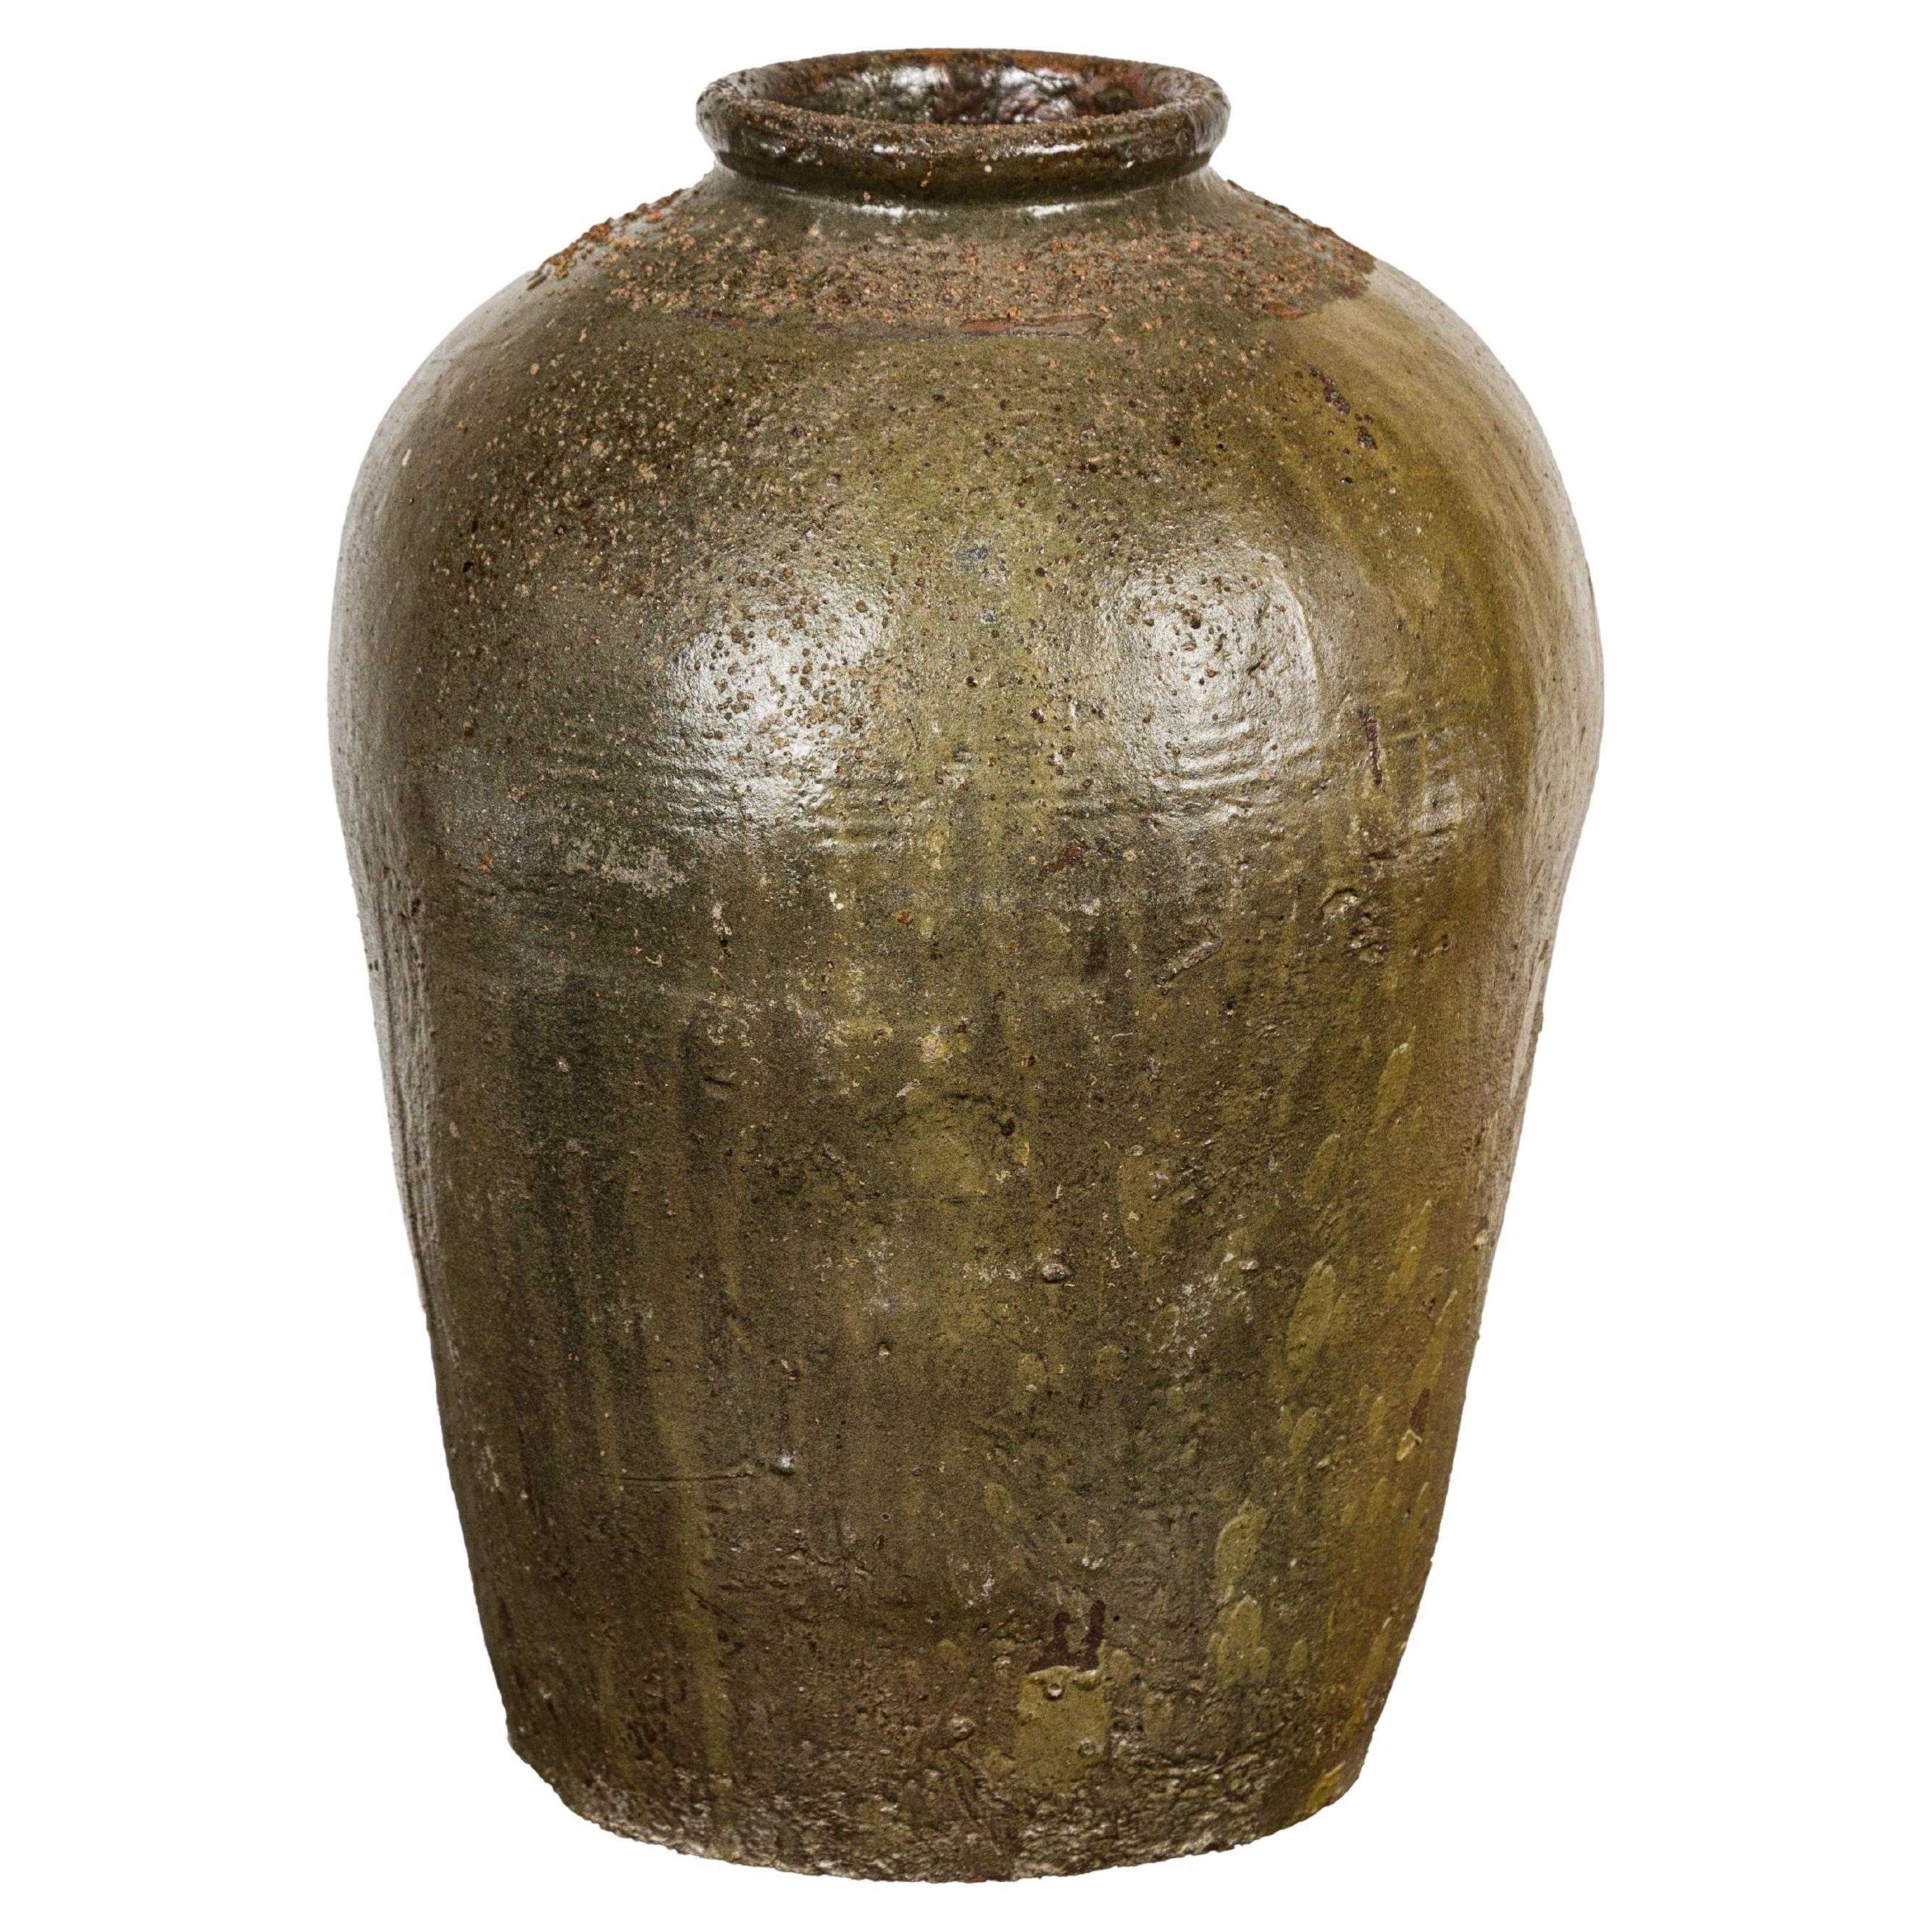 Rustic Brownish Green Glazed Vase with Mineral Deposits - Country Collection